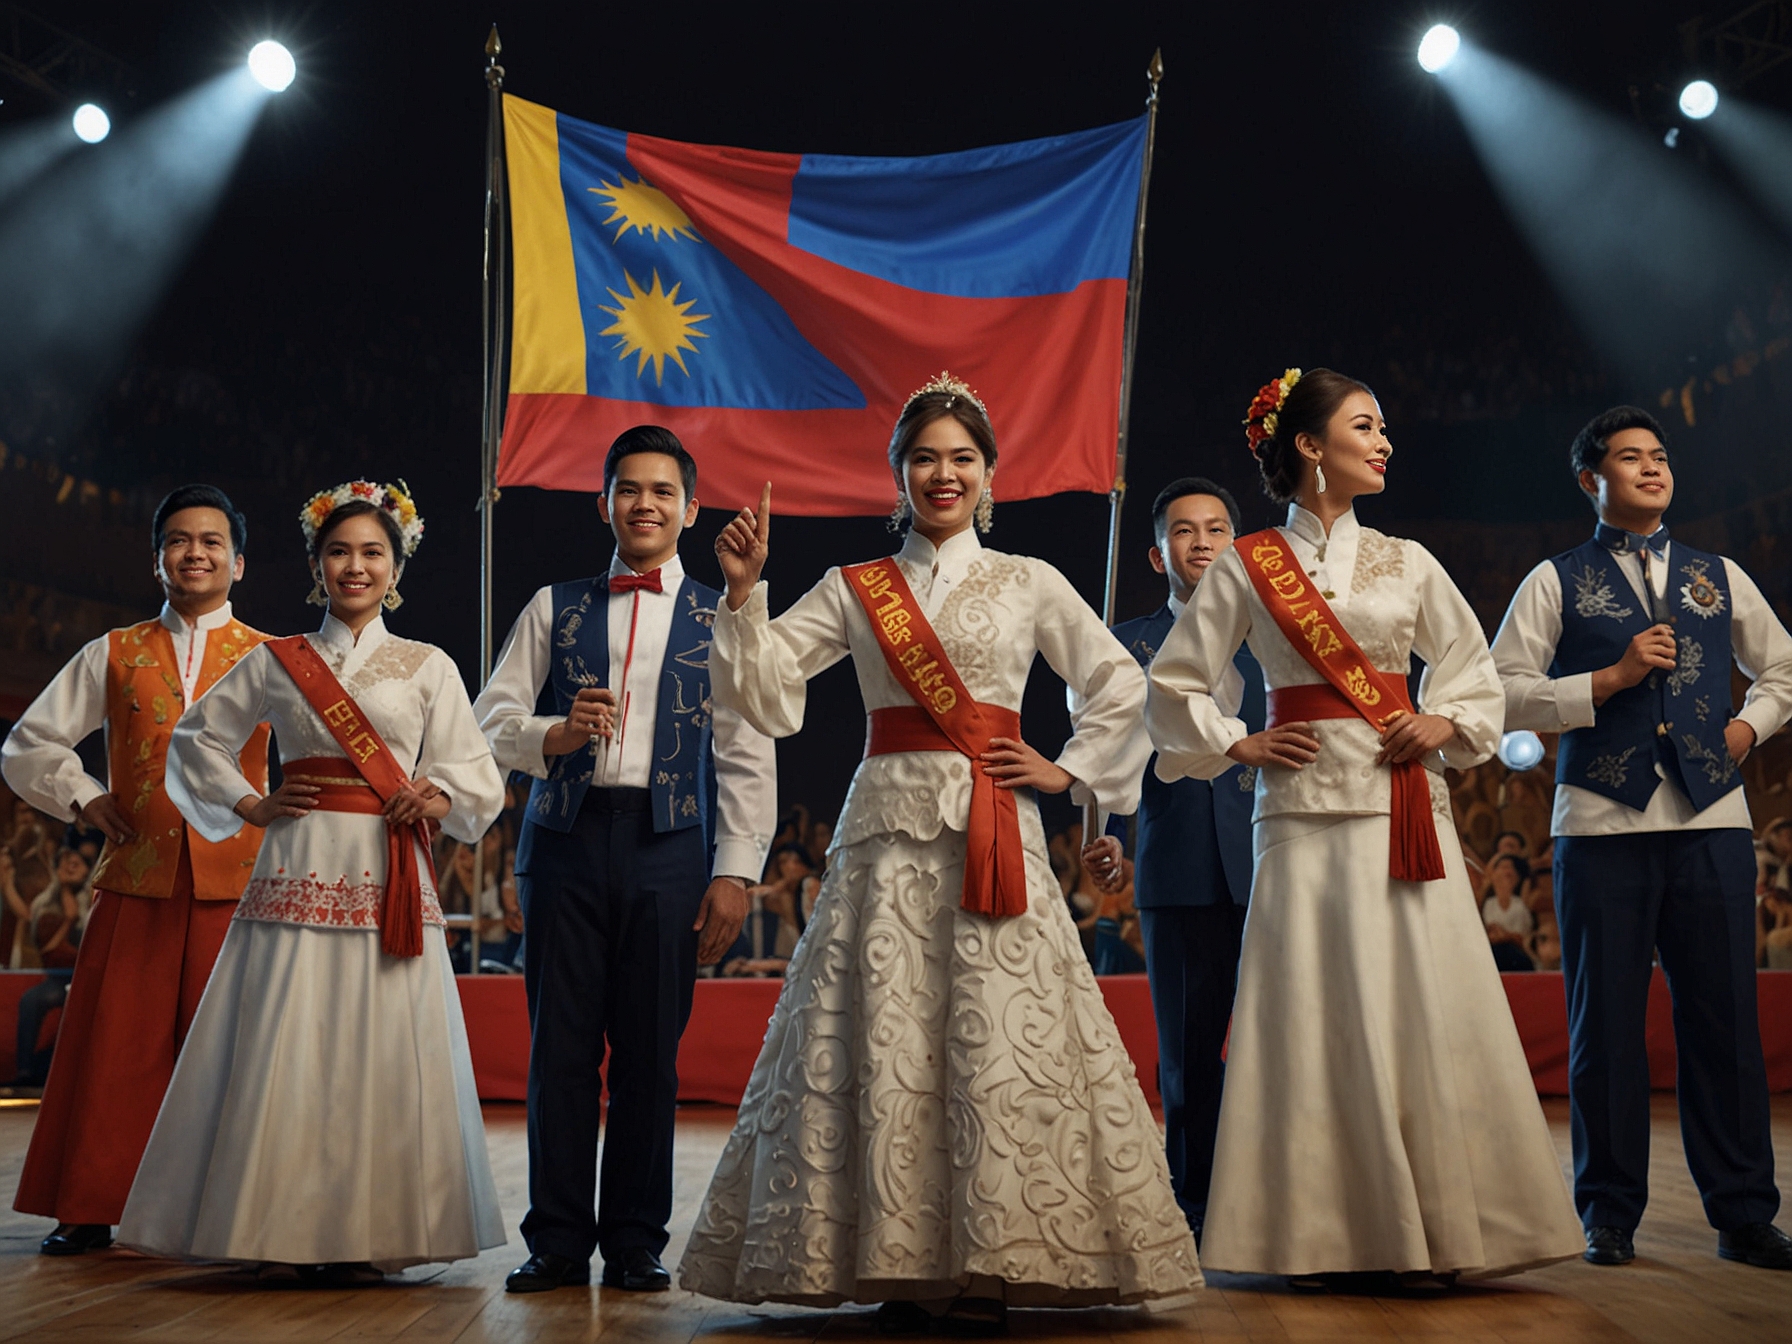 SB19 members, dressed in traditional Filipino attire, passionately perform 'O Bayan Ko' on stage at the MEGA Ball, with the Philippine flag and historical symbols as the backdrop.